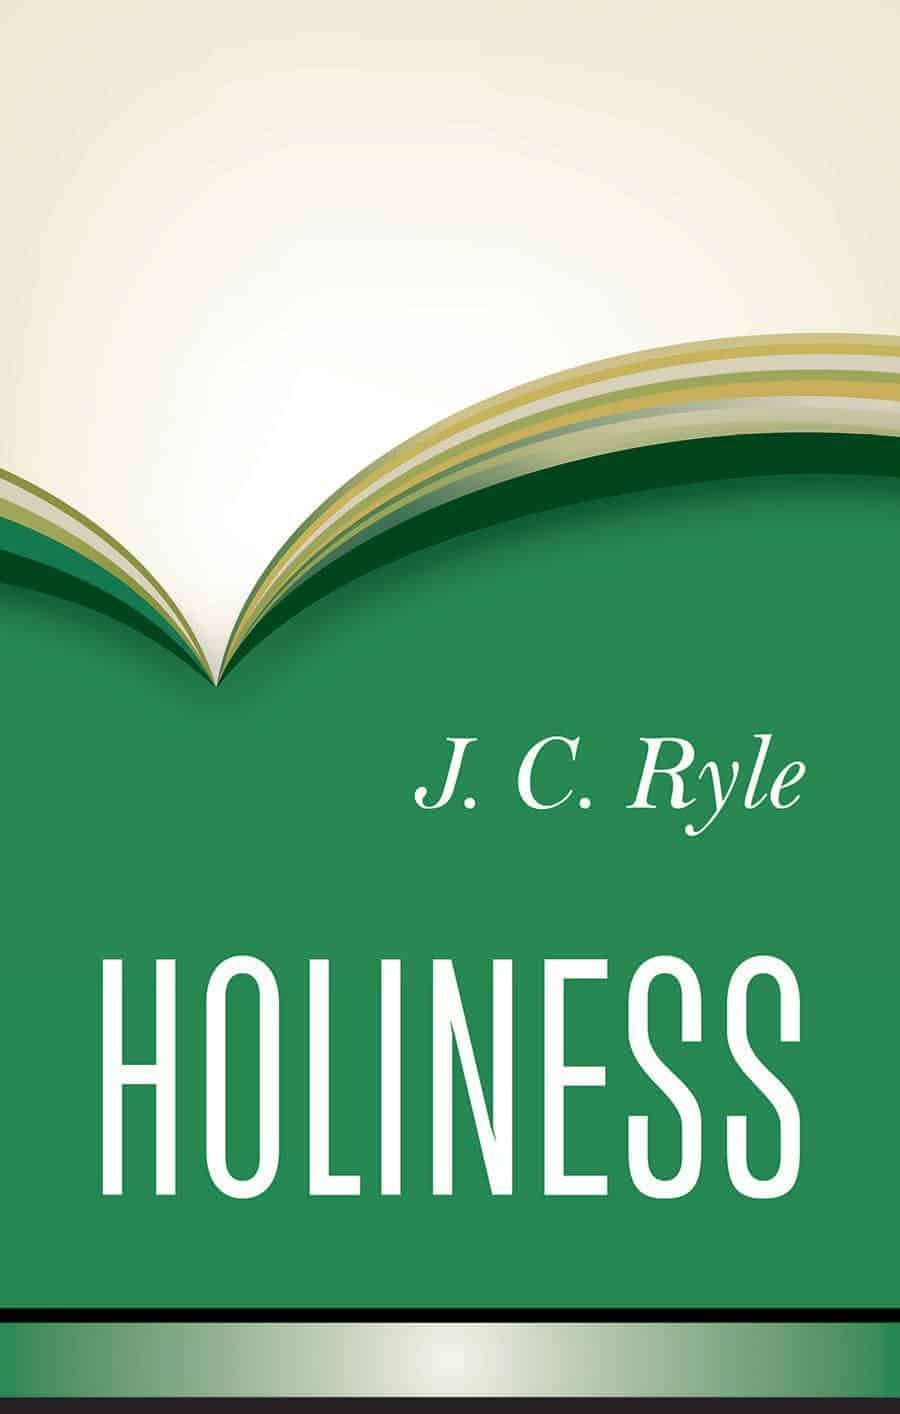 JC Ryle’s Holiness–A Review